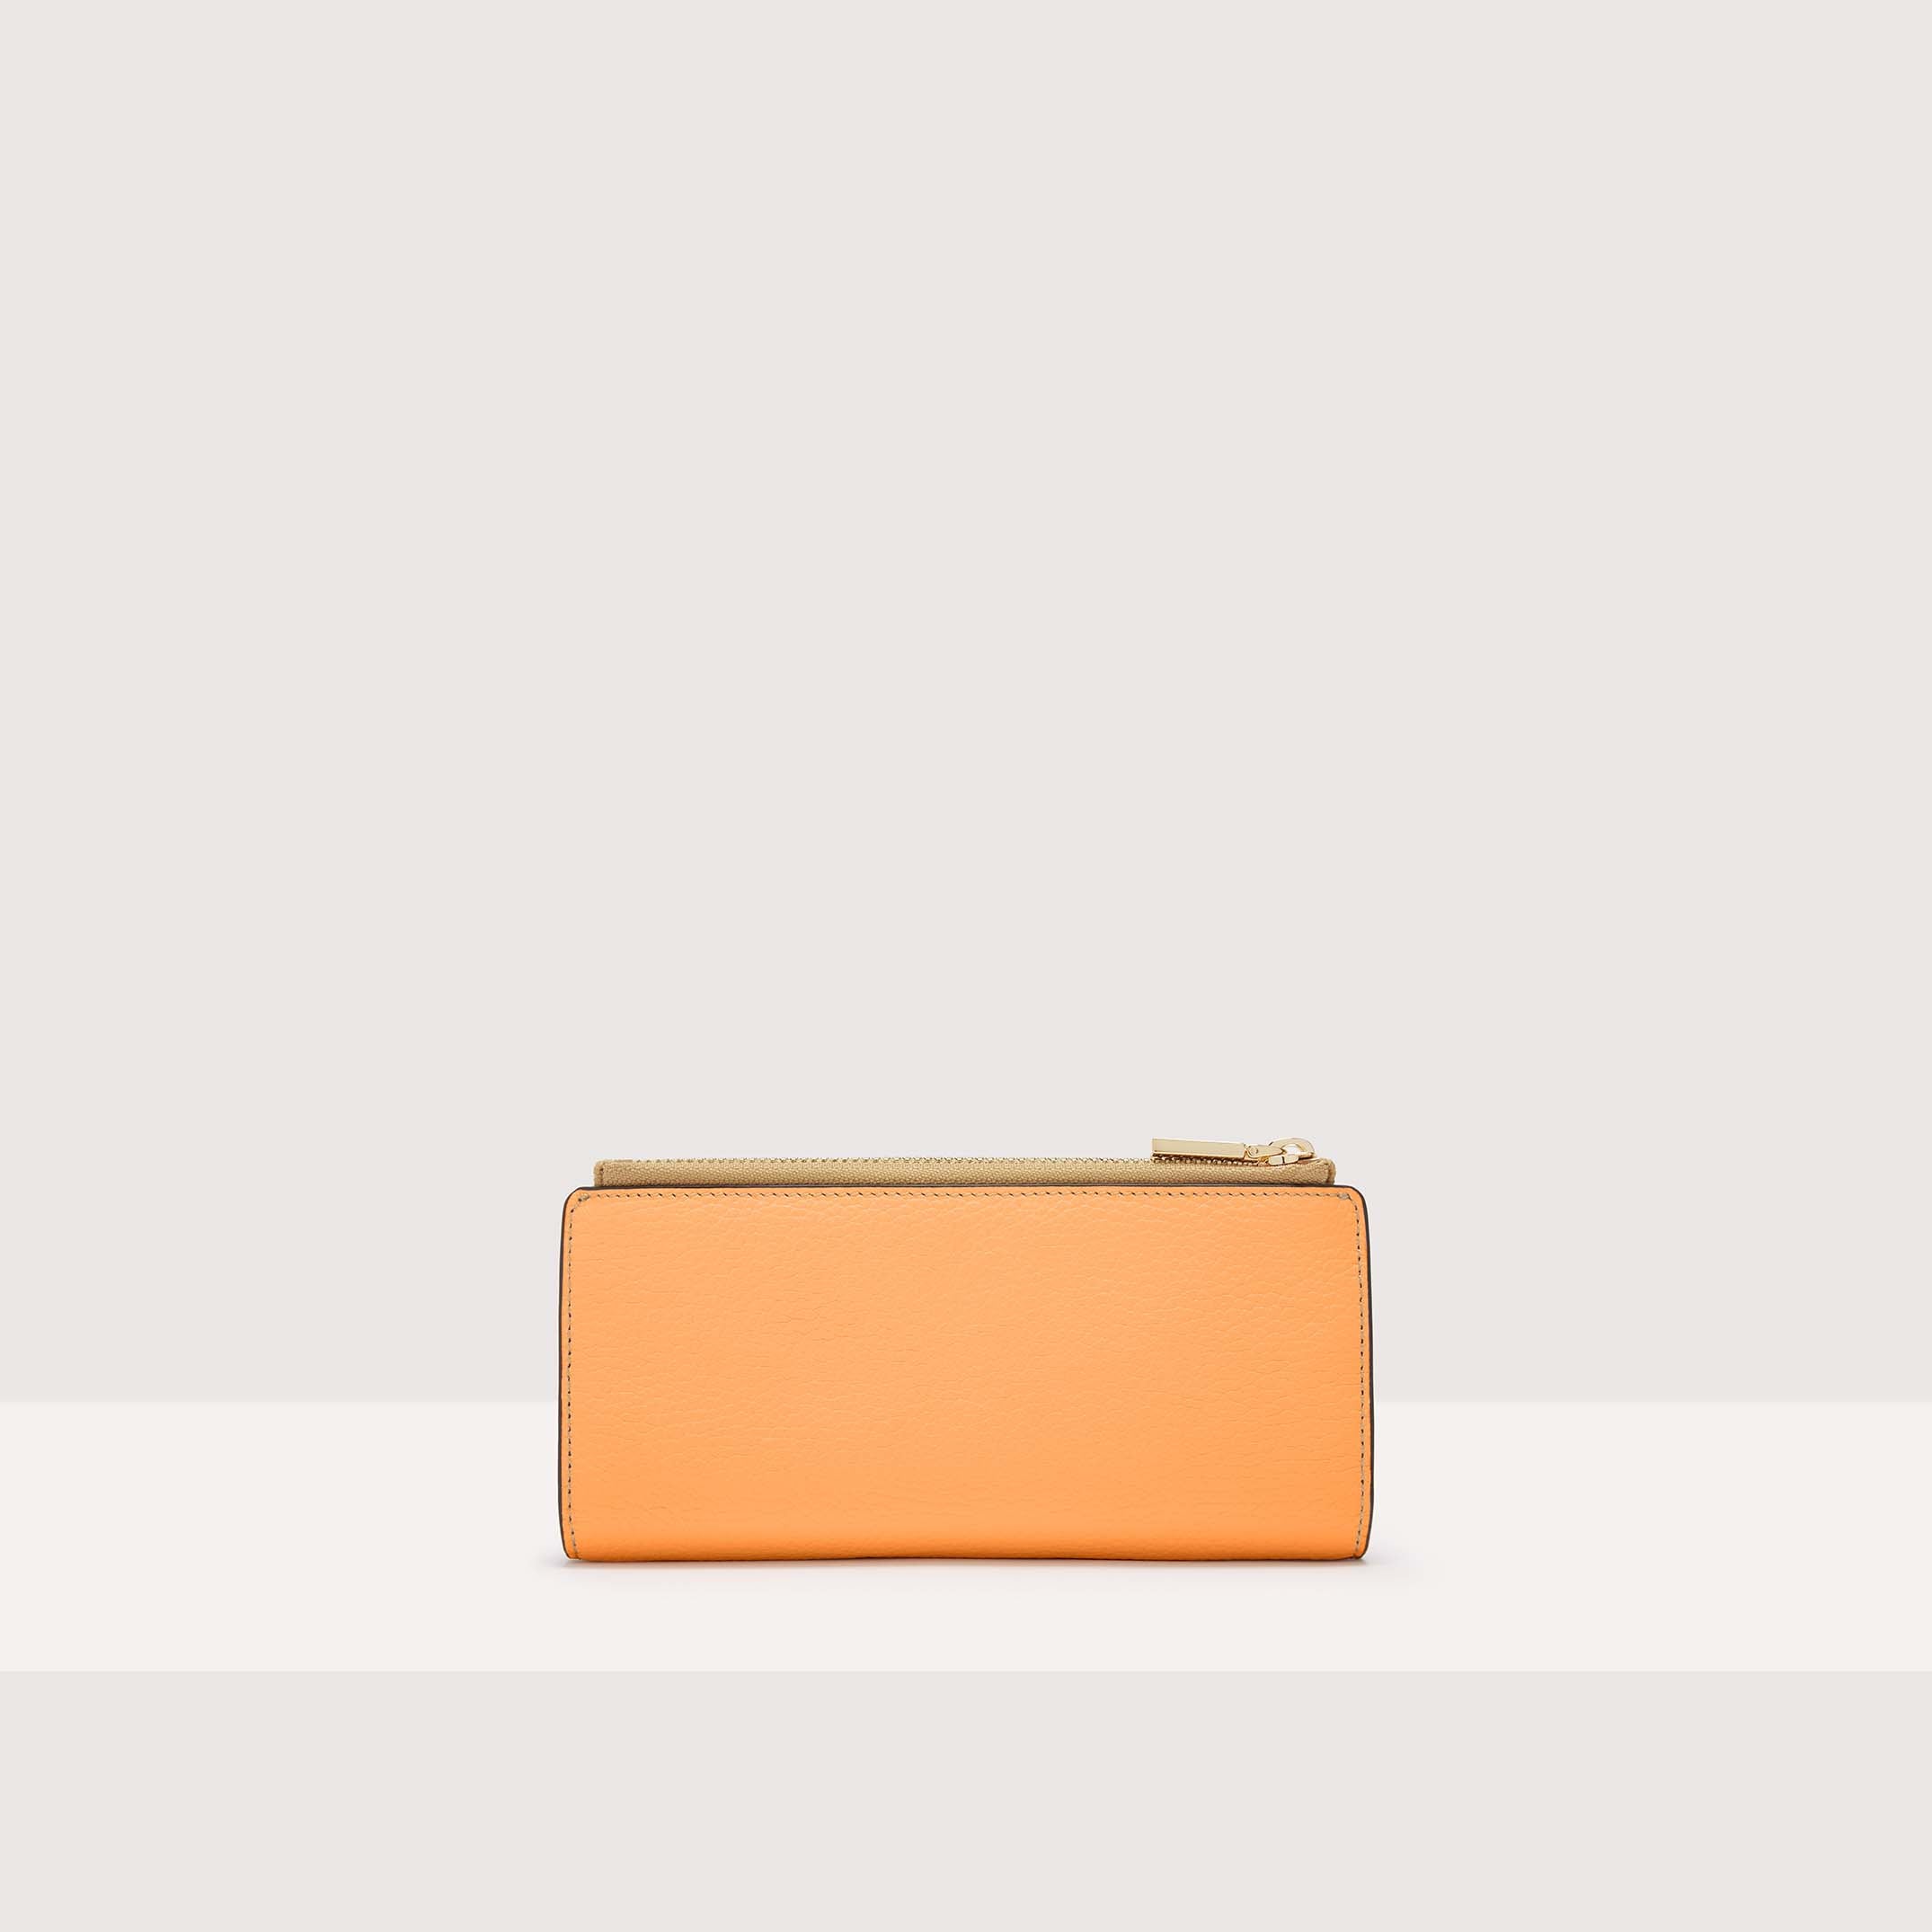 Coccinelle Metallic Tricolor Grained Leather Large Wallet